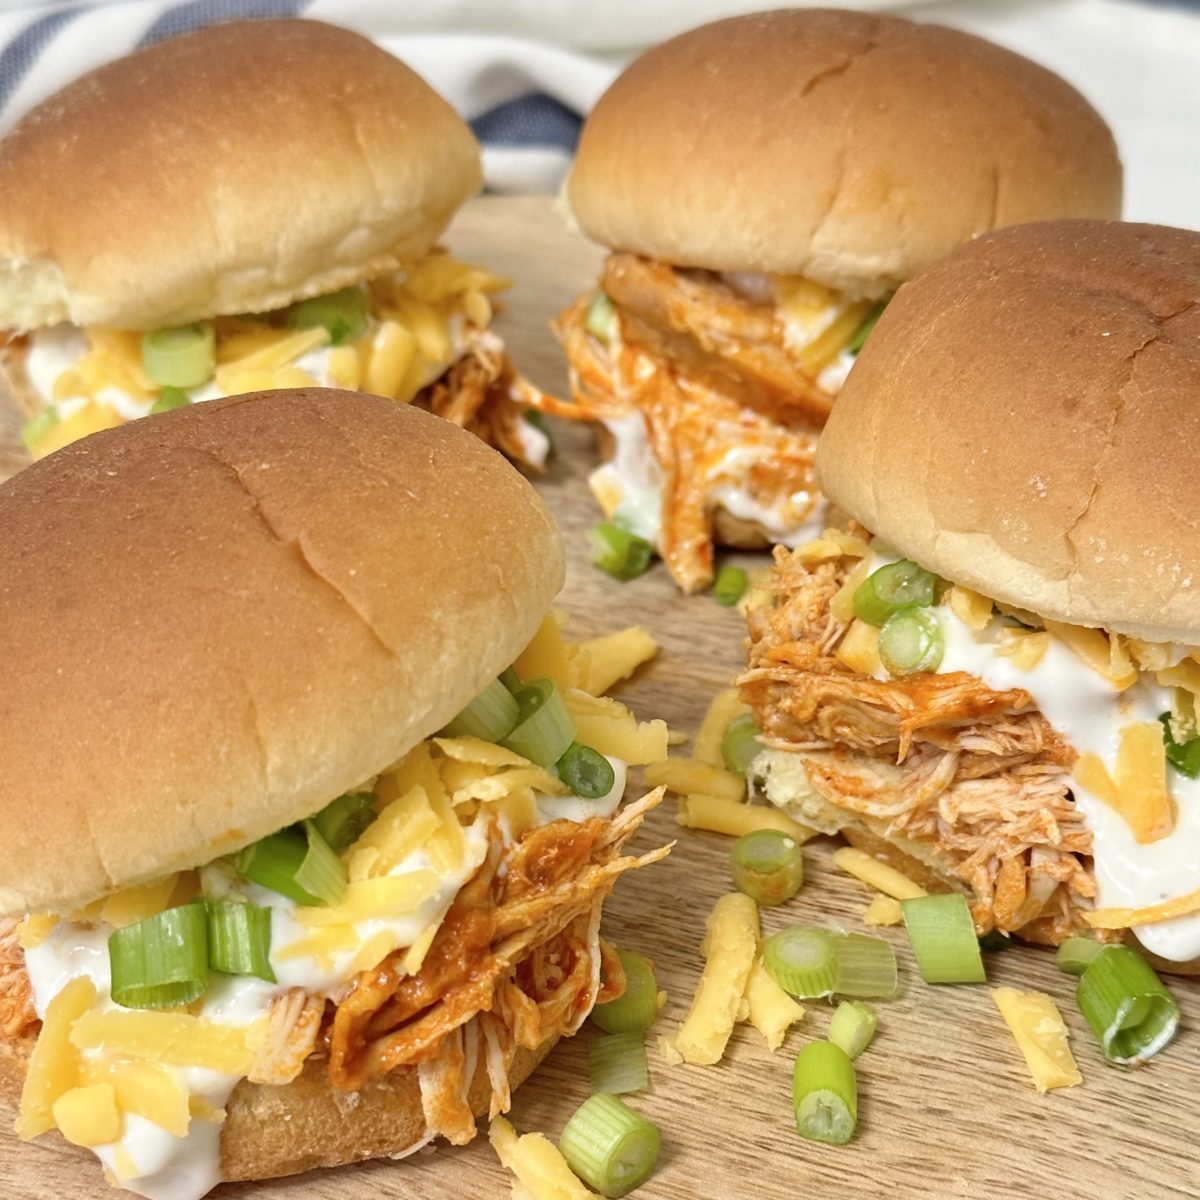 Slow Cooker Buffalo Chicken Sliders topped with ranch dressing, cheddar cheese, and sliced green onions.